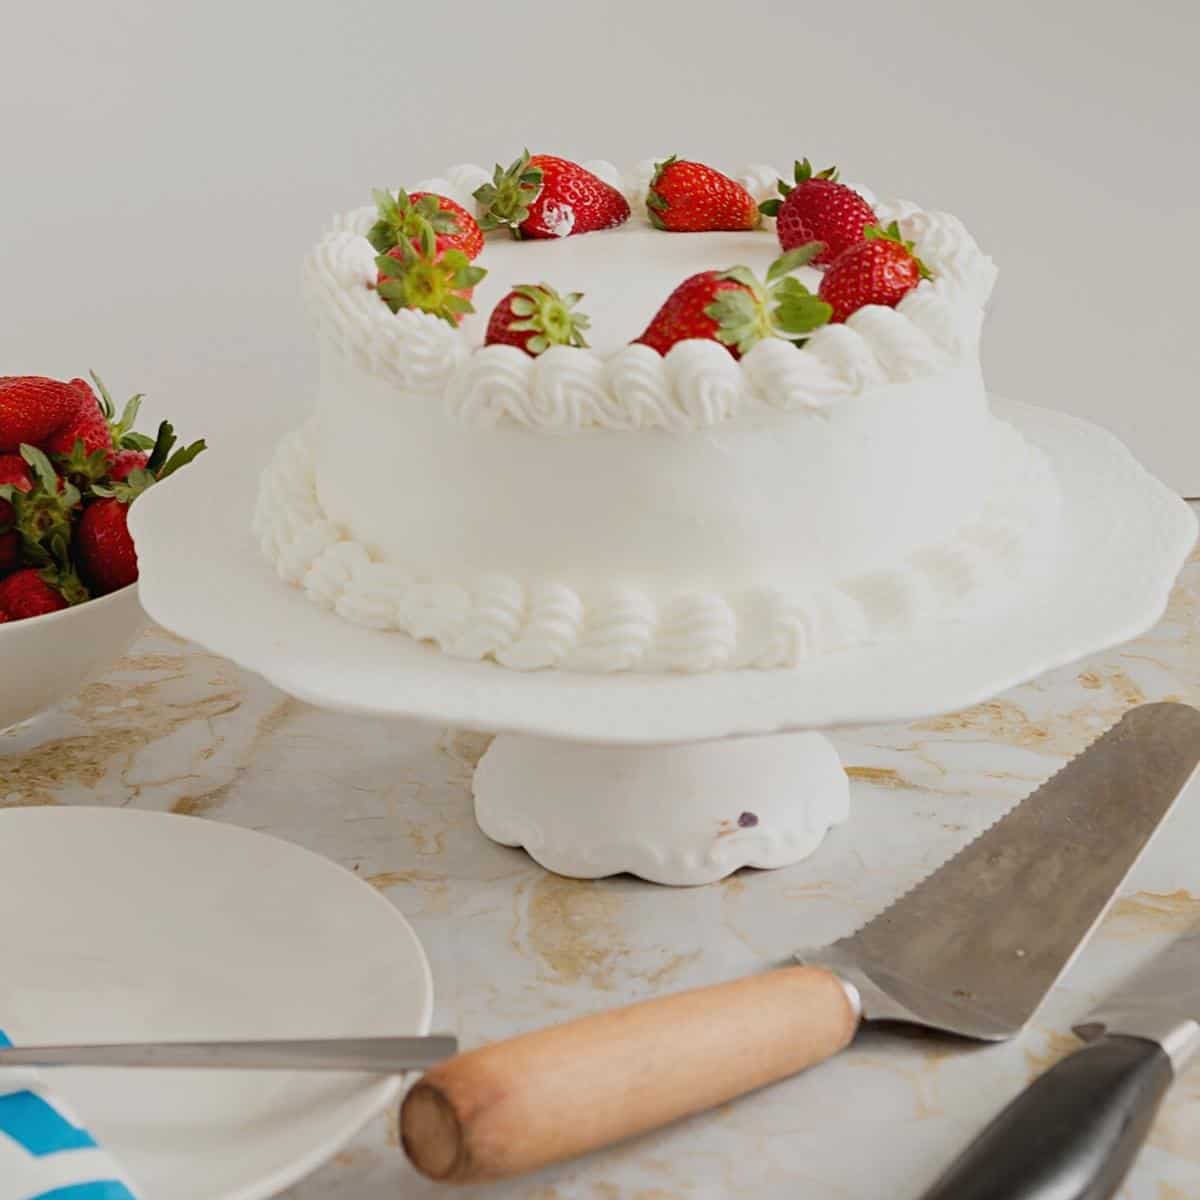 A whip cream frosted cake.